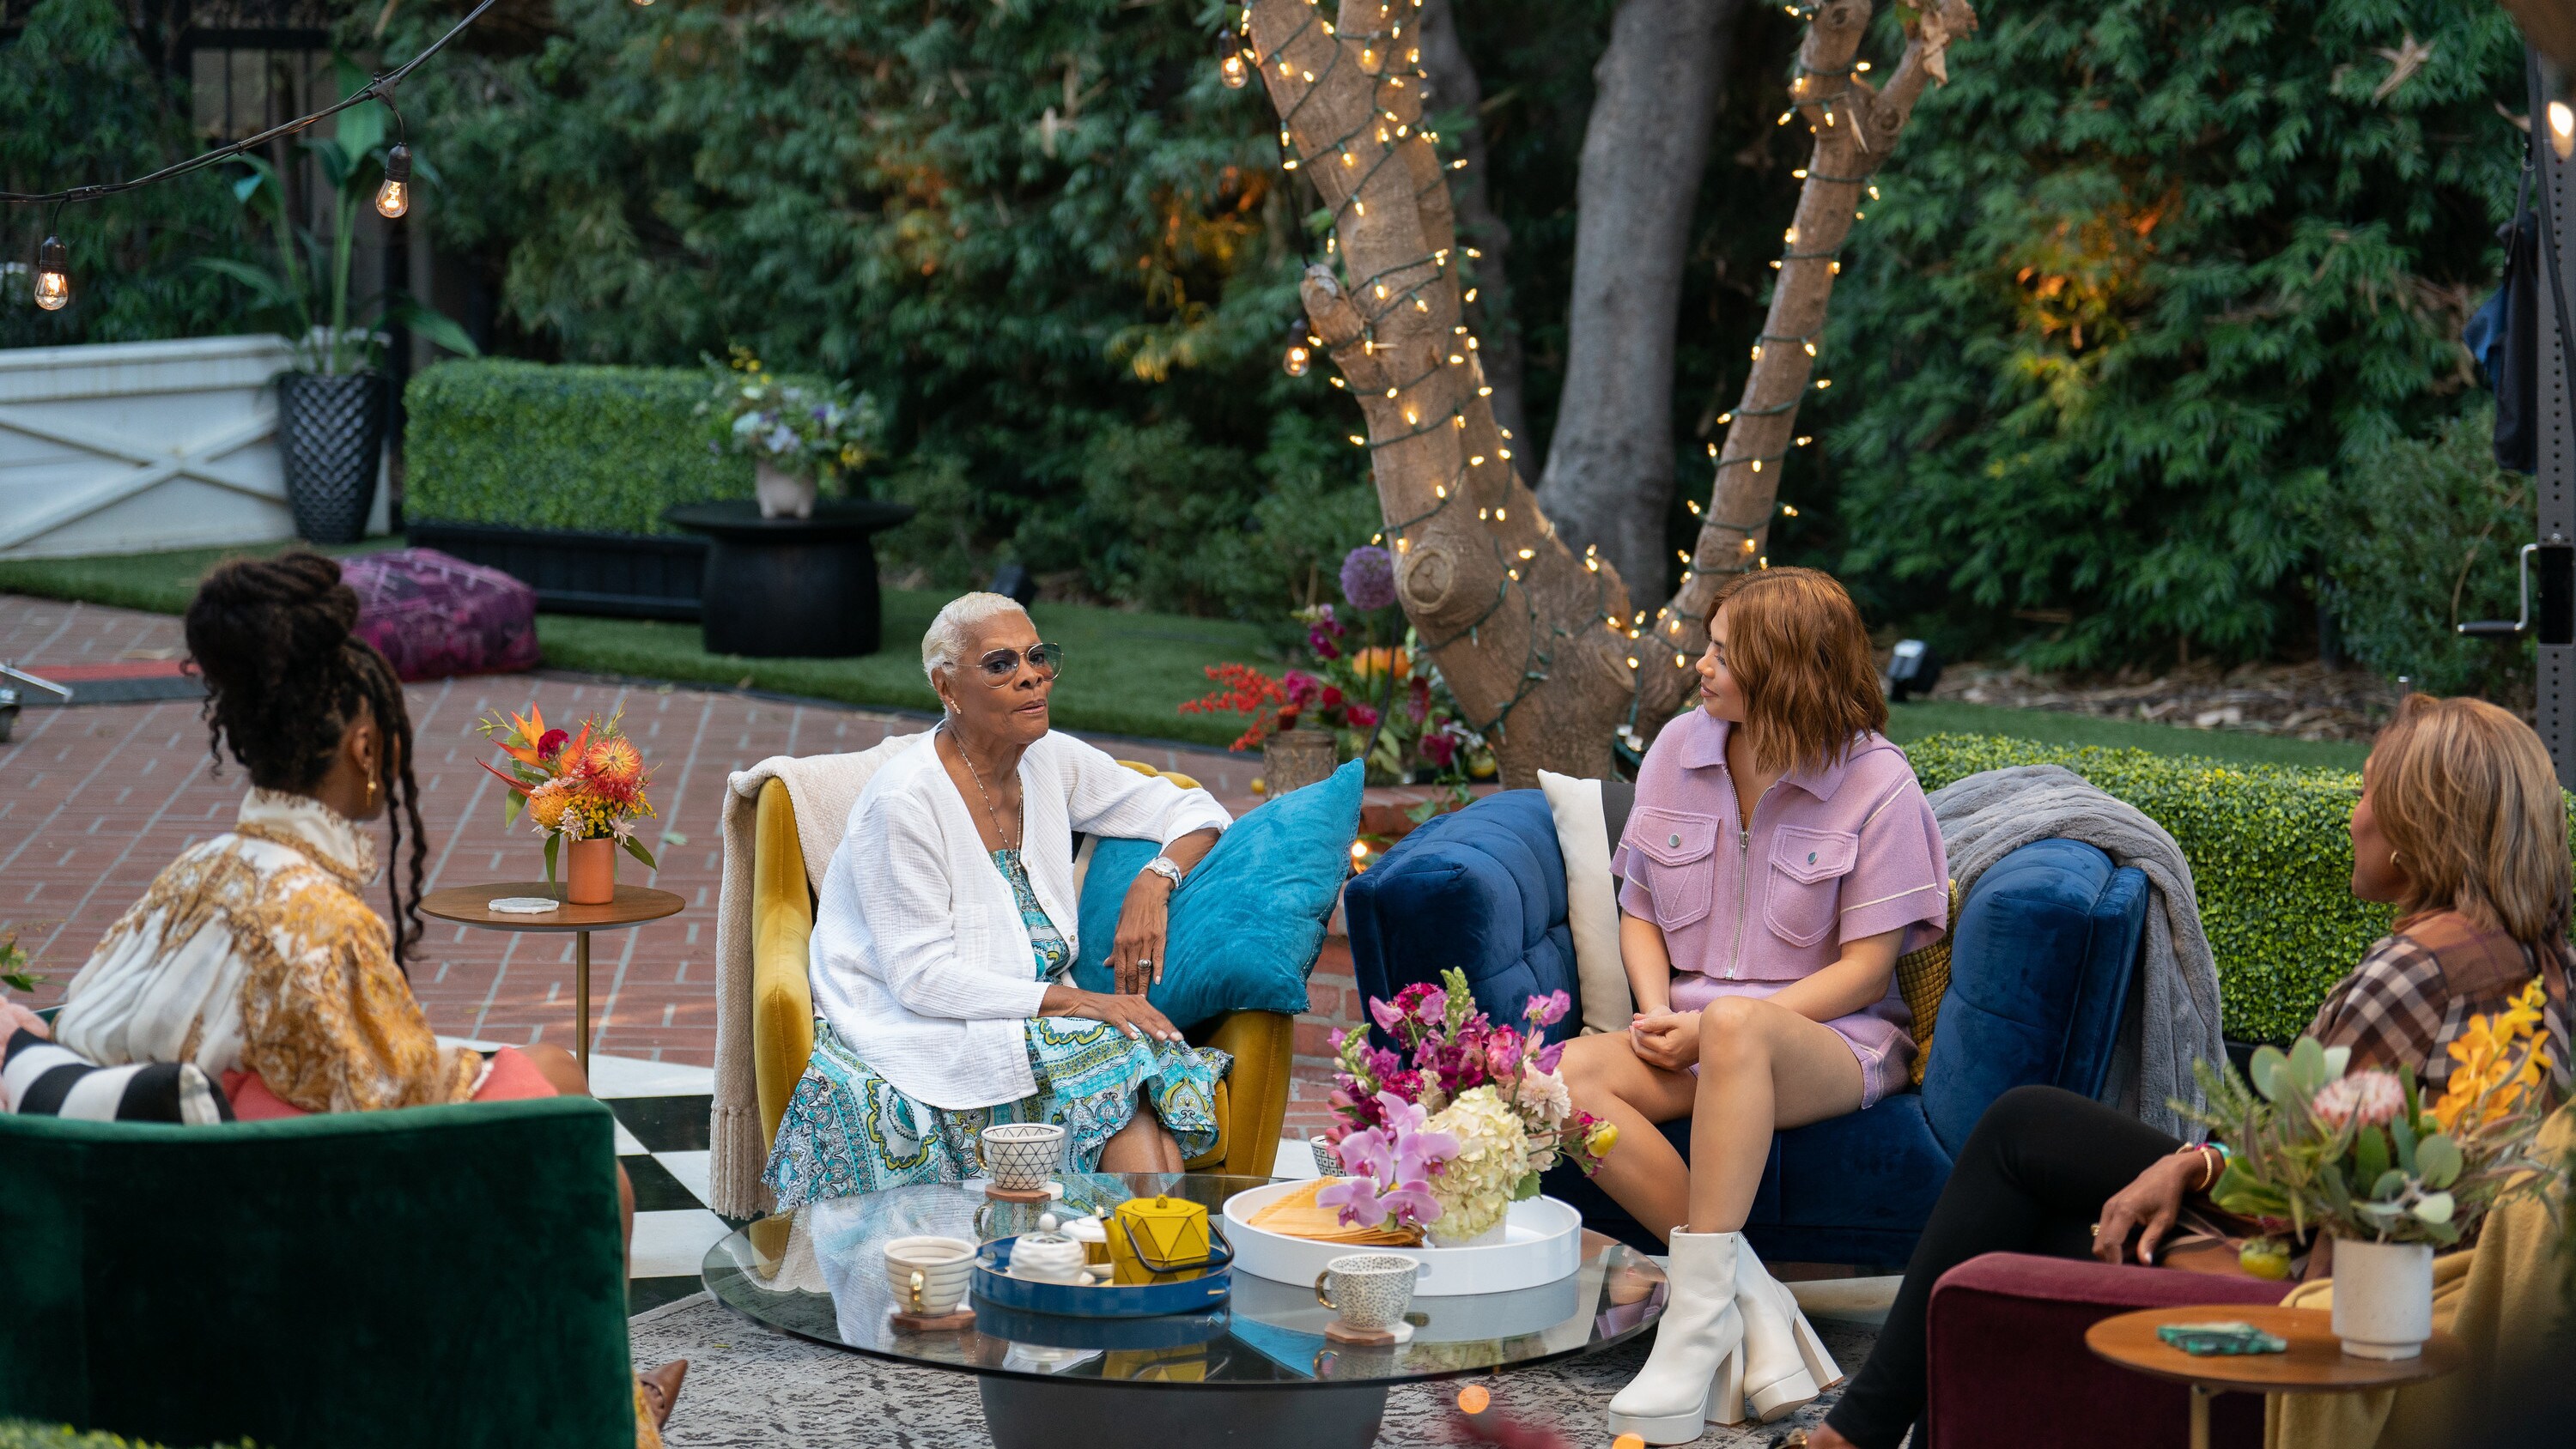 YaYa DaCosta, Dionne Warwick, Hayley Kiyoko, and Robin Roberts. In season 2 of Turning the Tables with Robin Roberts, Robin Roberts gets personal with a new group of Hollywood's iconic women as they bear witness to their incredible journeys on their path to purpose. (Disney/Ser Baffo)